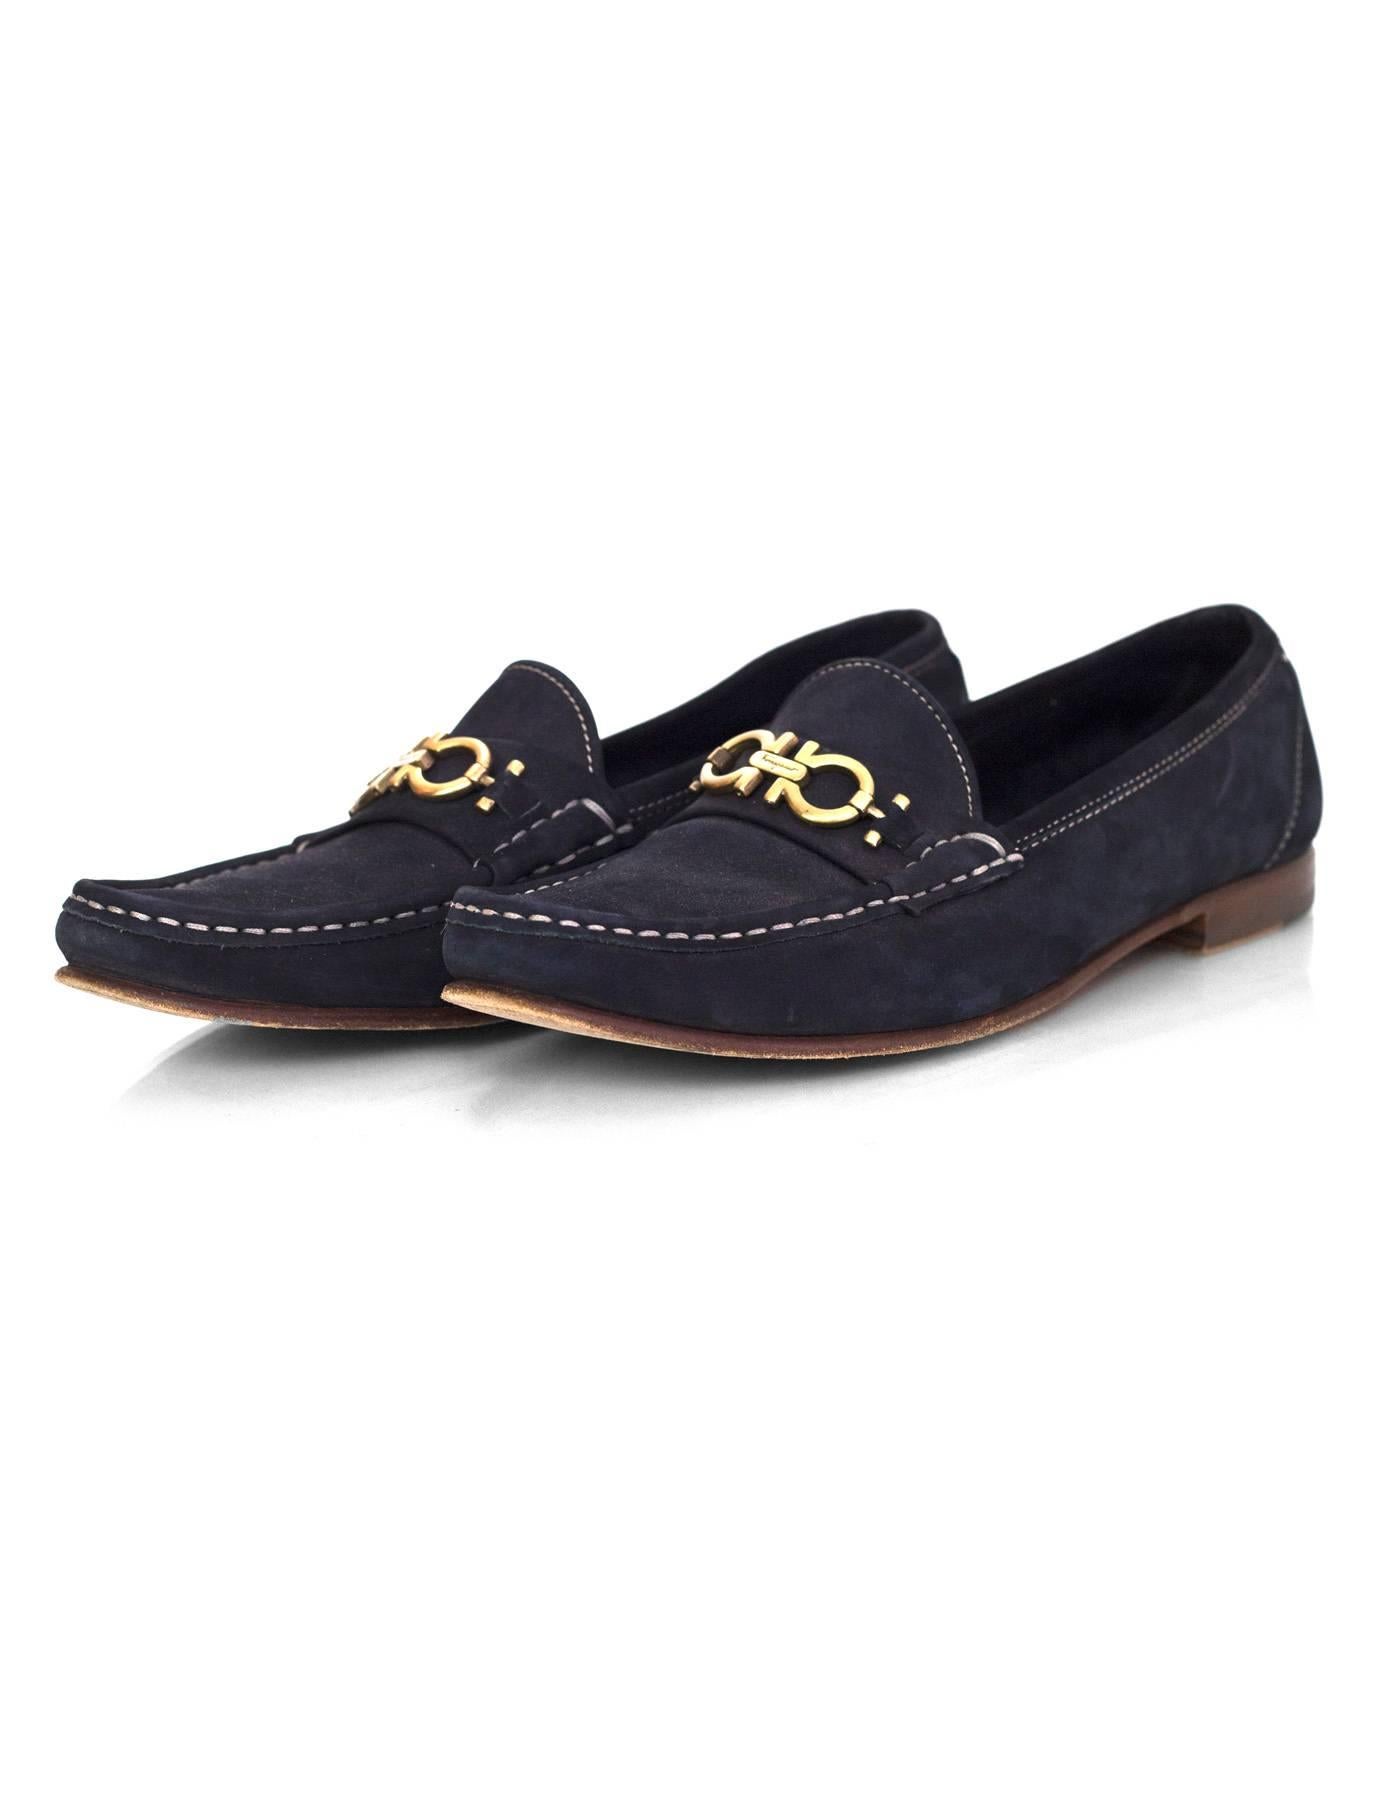 Salvatore Ferragamo Navy Suede Loafers Sz 9AA
*this is a narrow fit shoe*

Made In: Italy
Color: Navy
Materials: Suede
Closure/Opening: Slide on
Sole Stamp: Salvatore Ferragamo Sport Made in Italy 9AA
Overall Condition: Excellent pre-owned condition